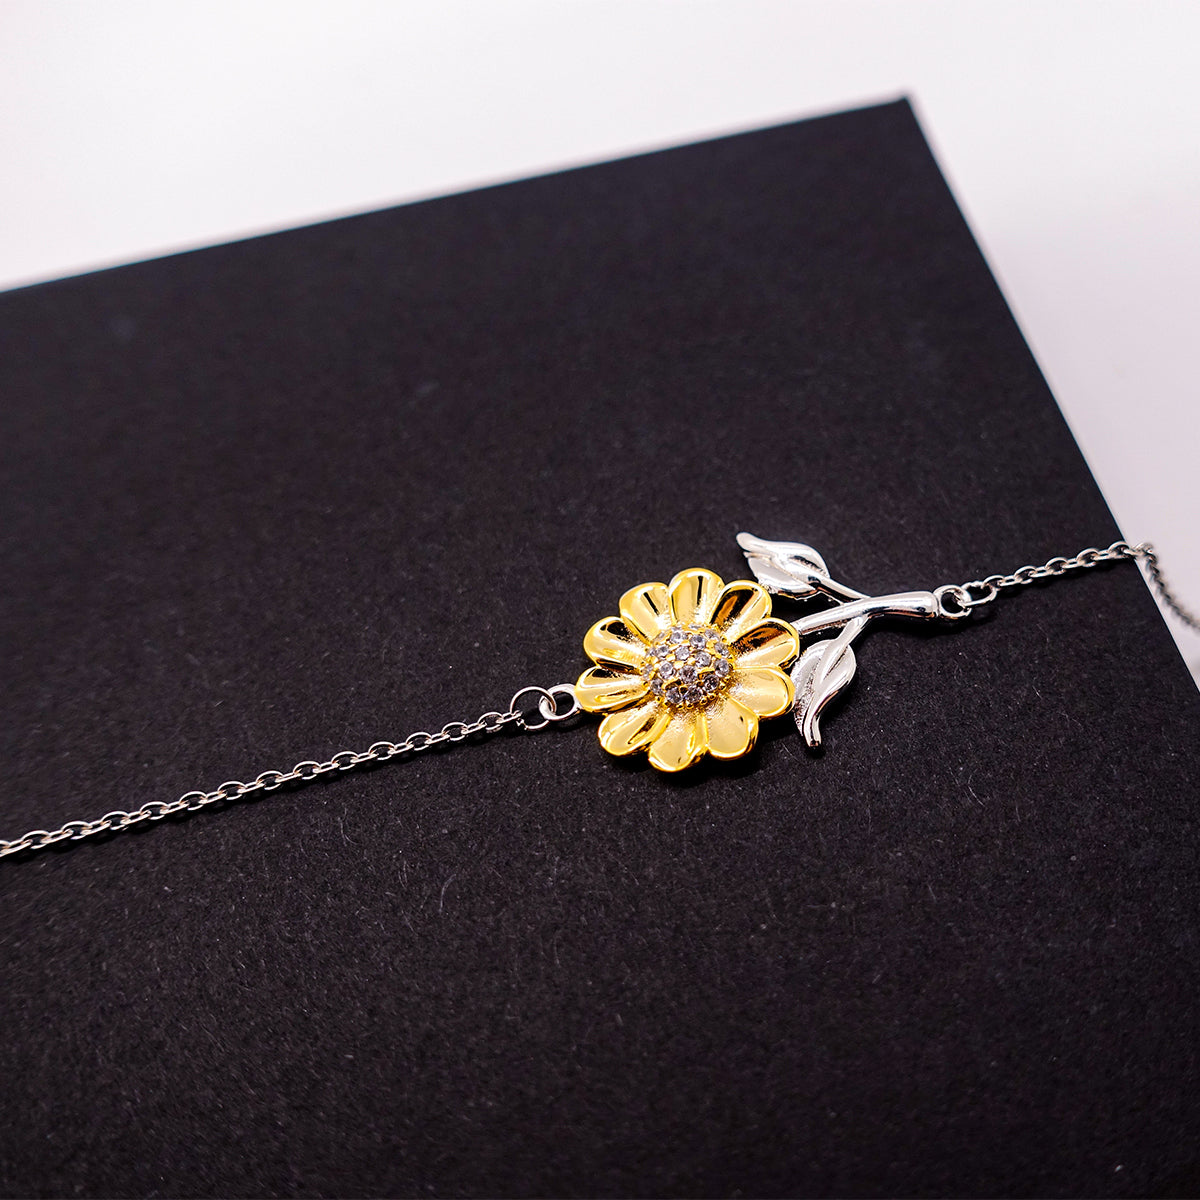 Funny Receptionist Mom Gifts, The best kind of MOM raises Receptionist, Birthday, Mother's Day, Cute Sunflower Bracelet for Receptionist Mom